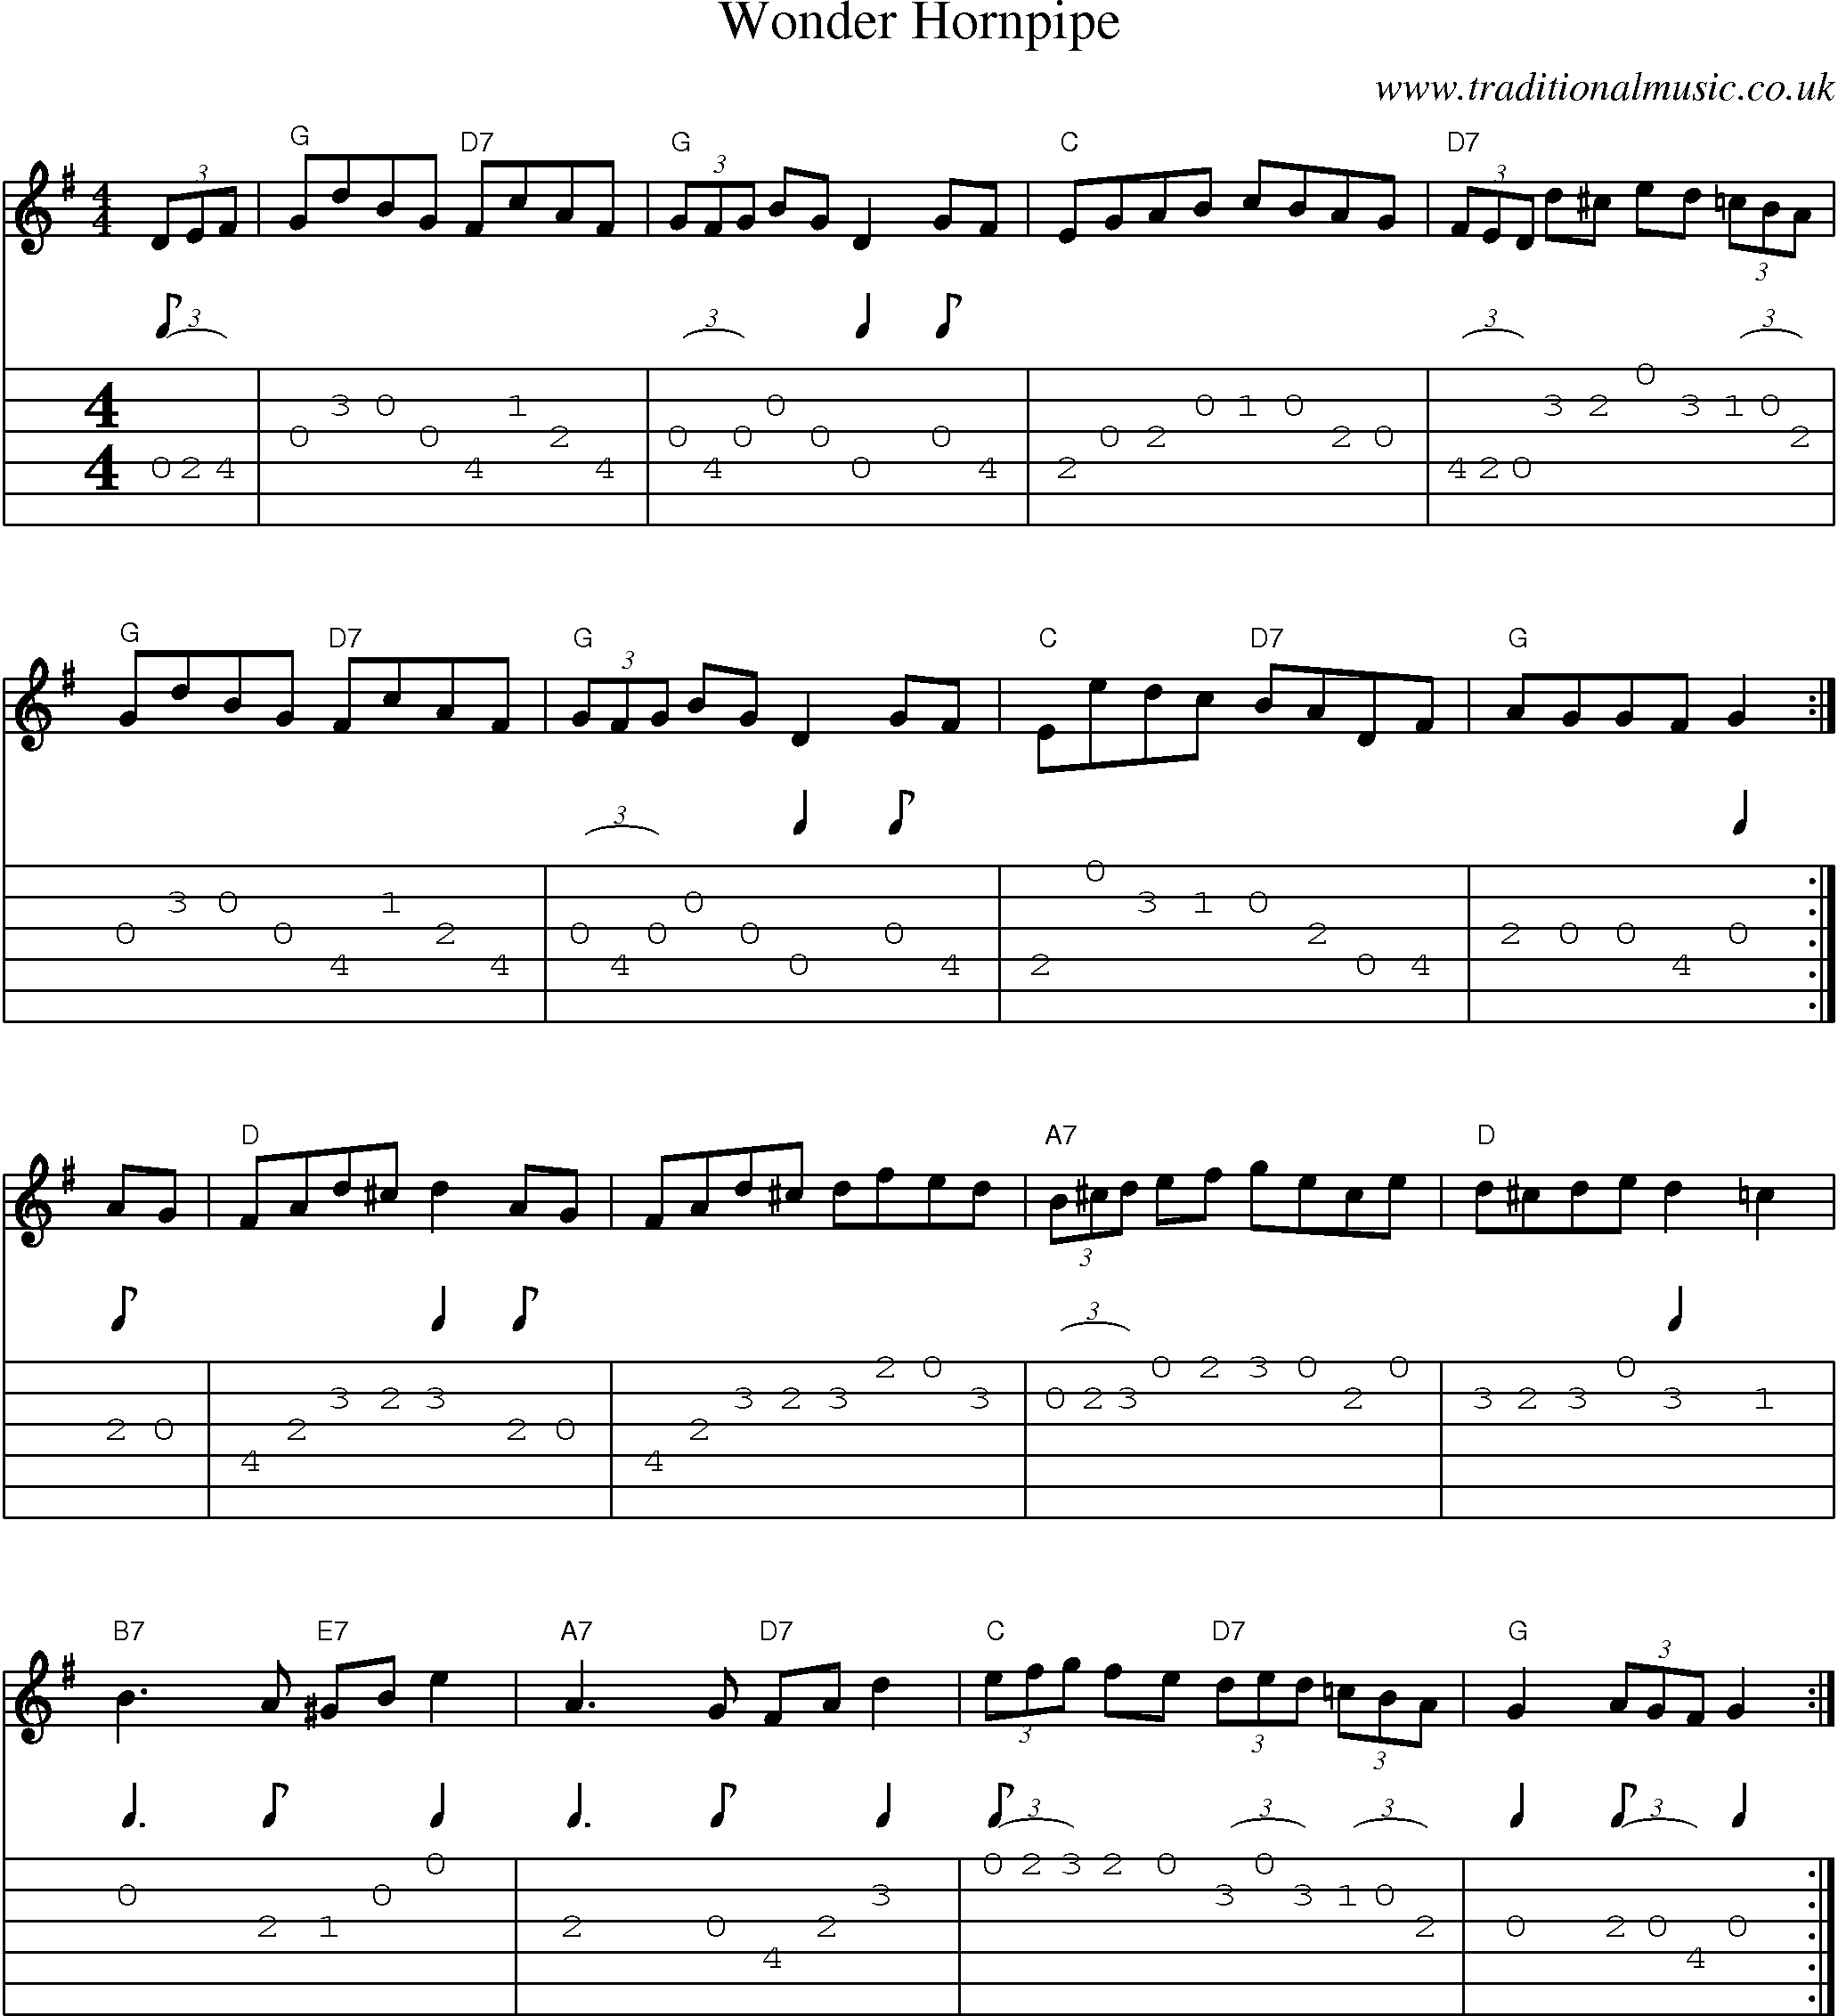 Music Score and Guitar Tabs for Wonder Hornpipe